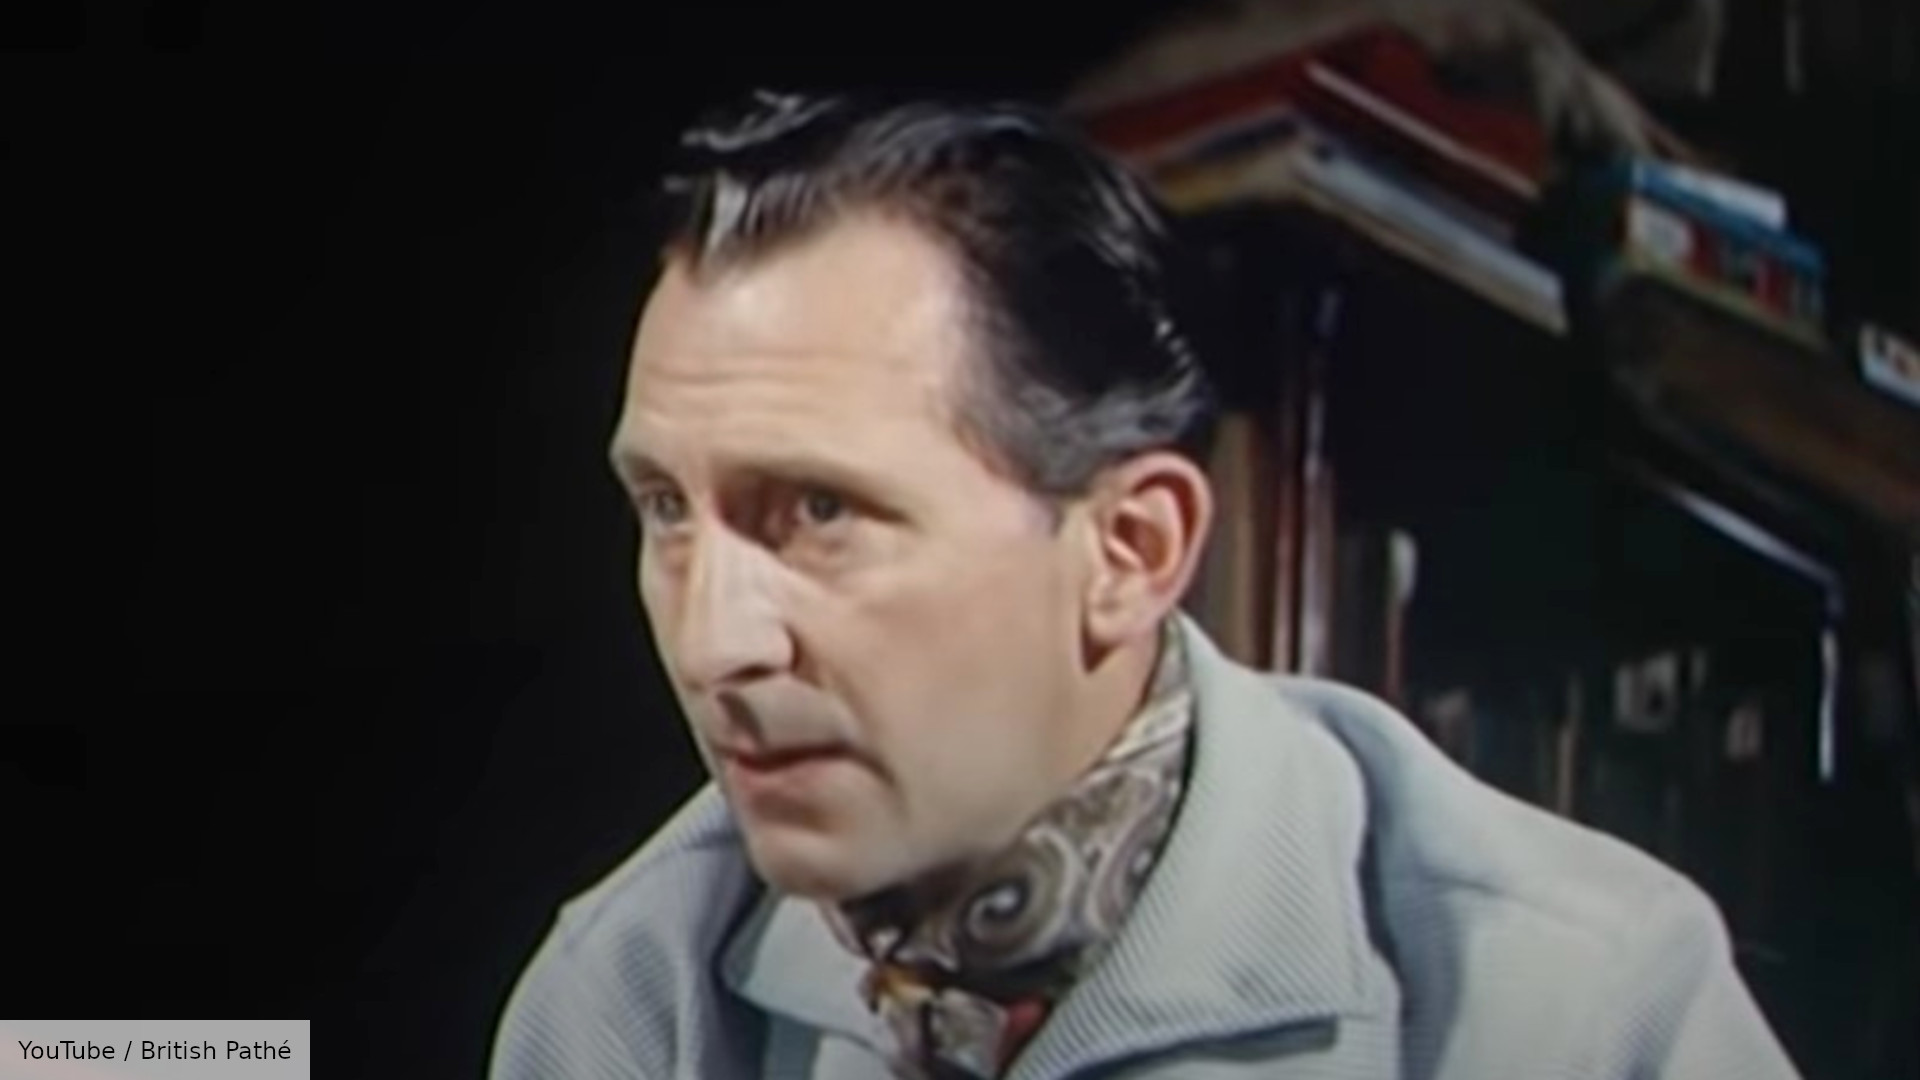 Did you know Star Wars legend Peter Cushing was a wargamer?